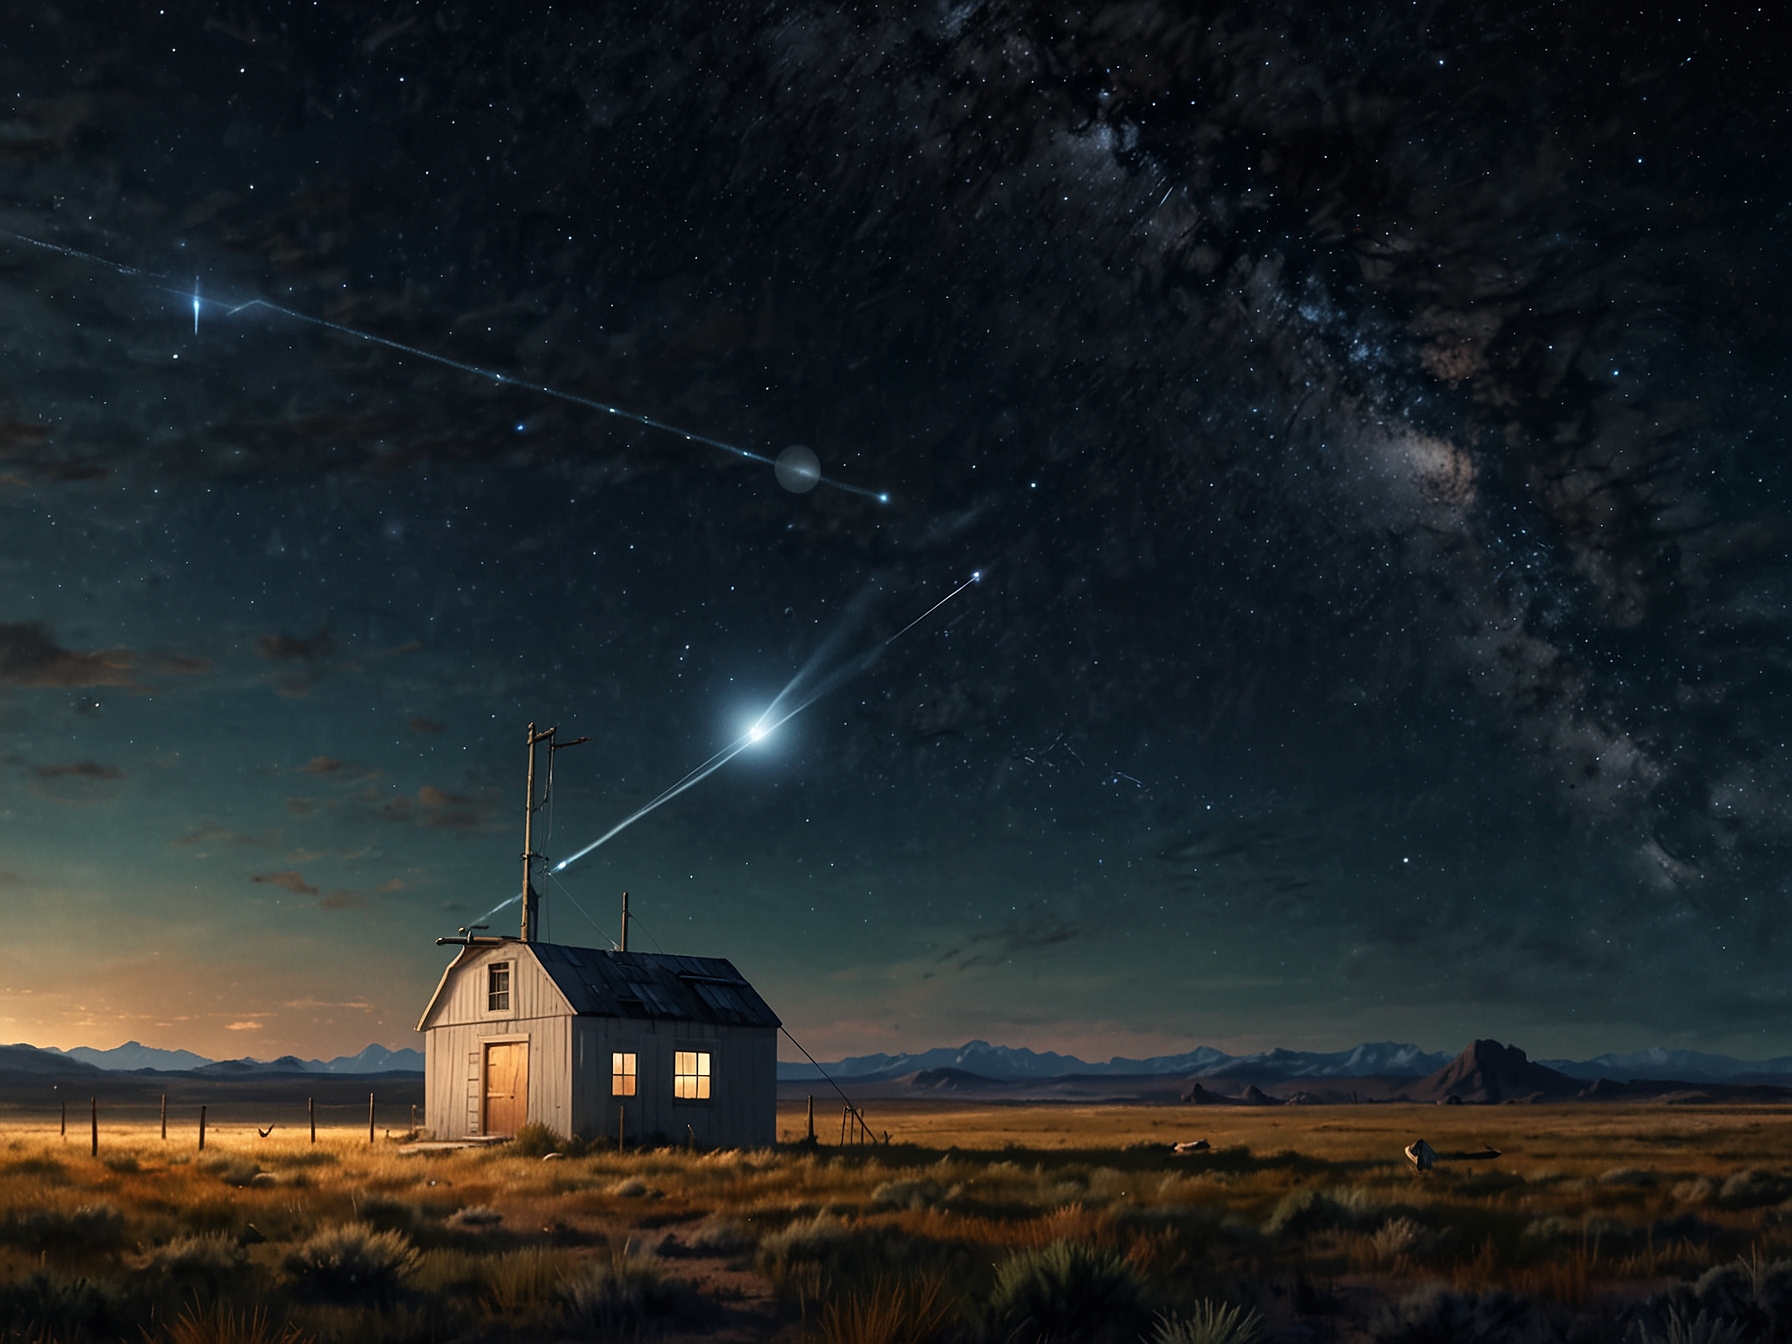 Illustration of the Starlink Mini setup in a remote location with a clear view of the sky, demonstrating its ability to provide high-speed internet in areas with poor traditional connectivity.